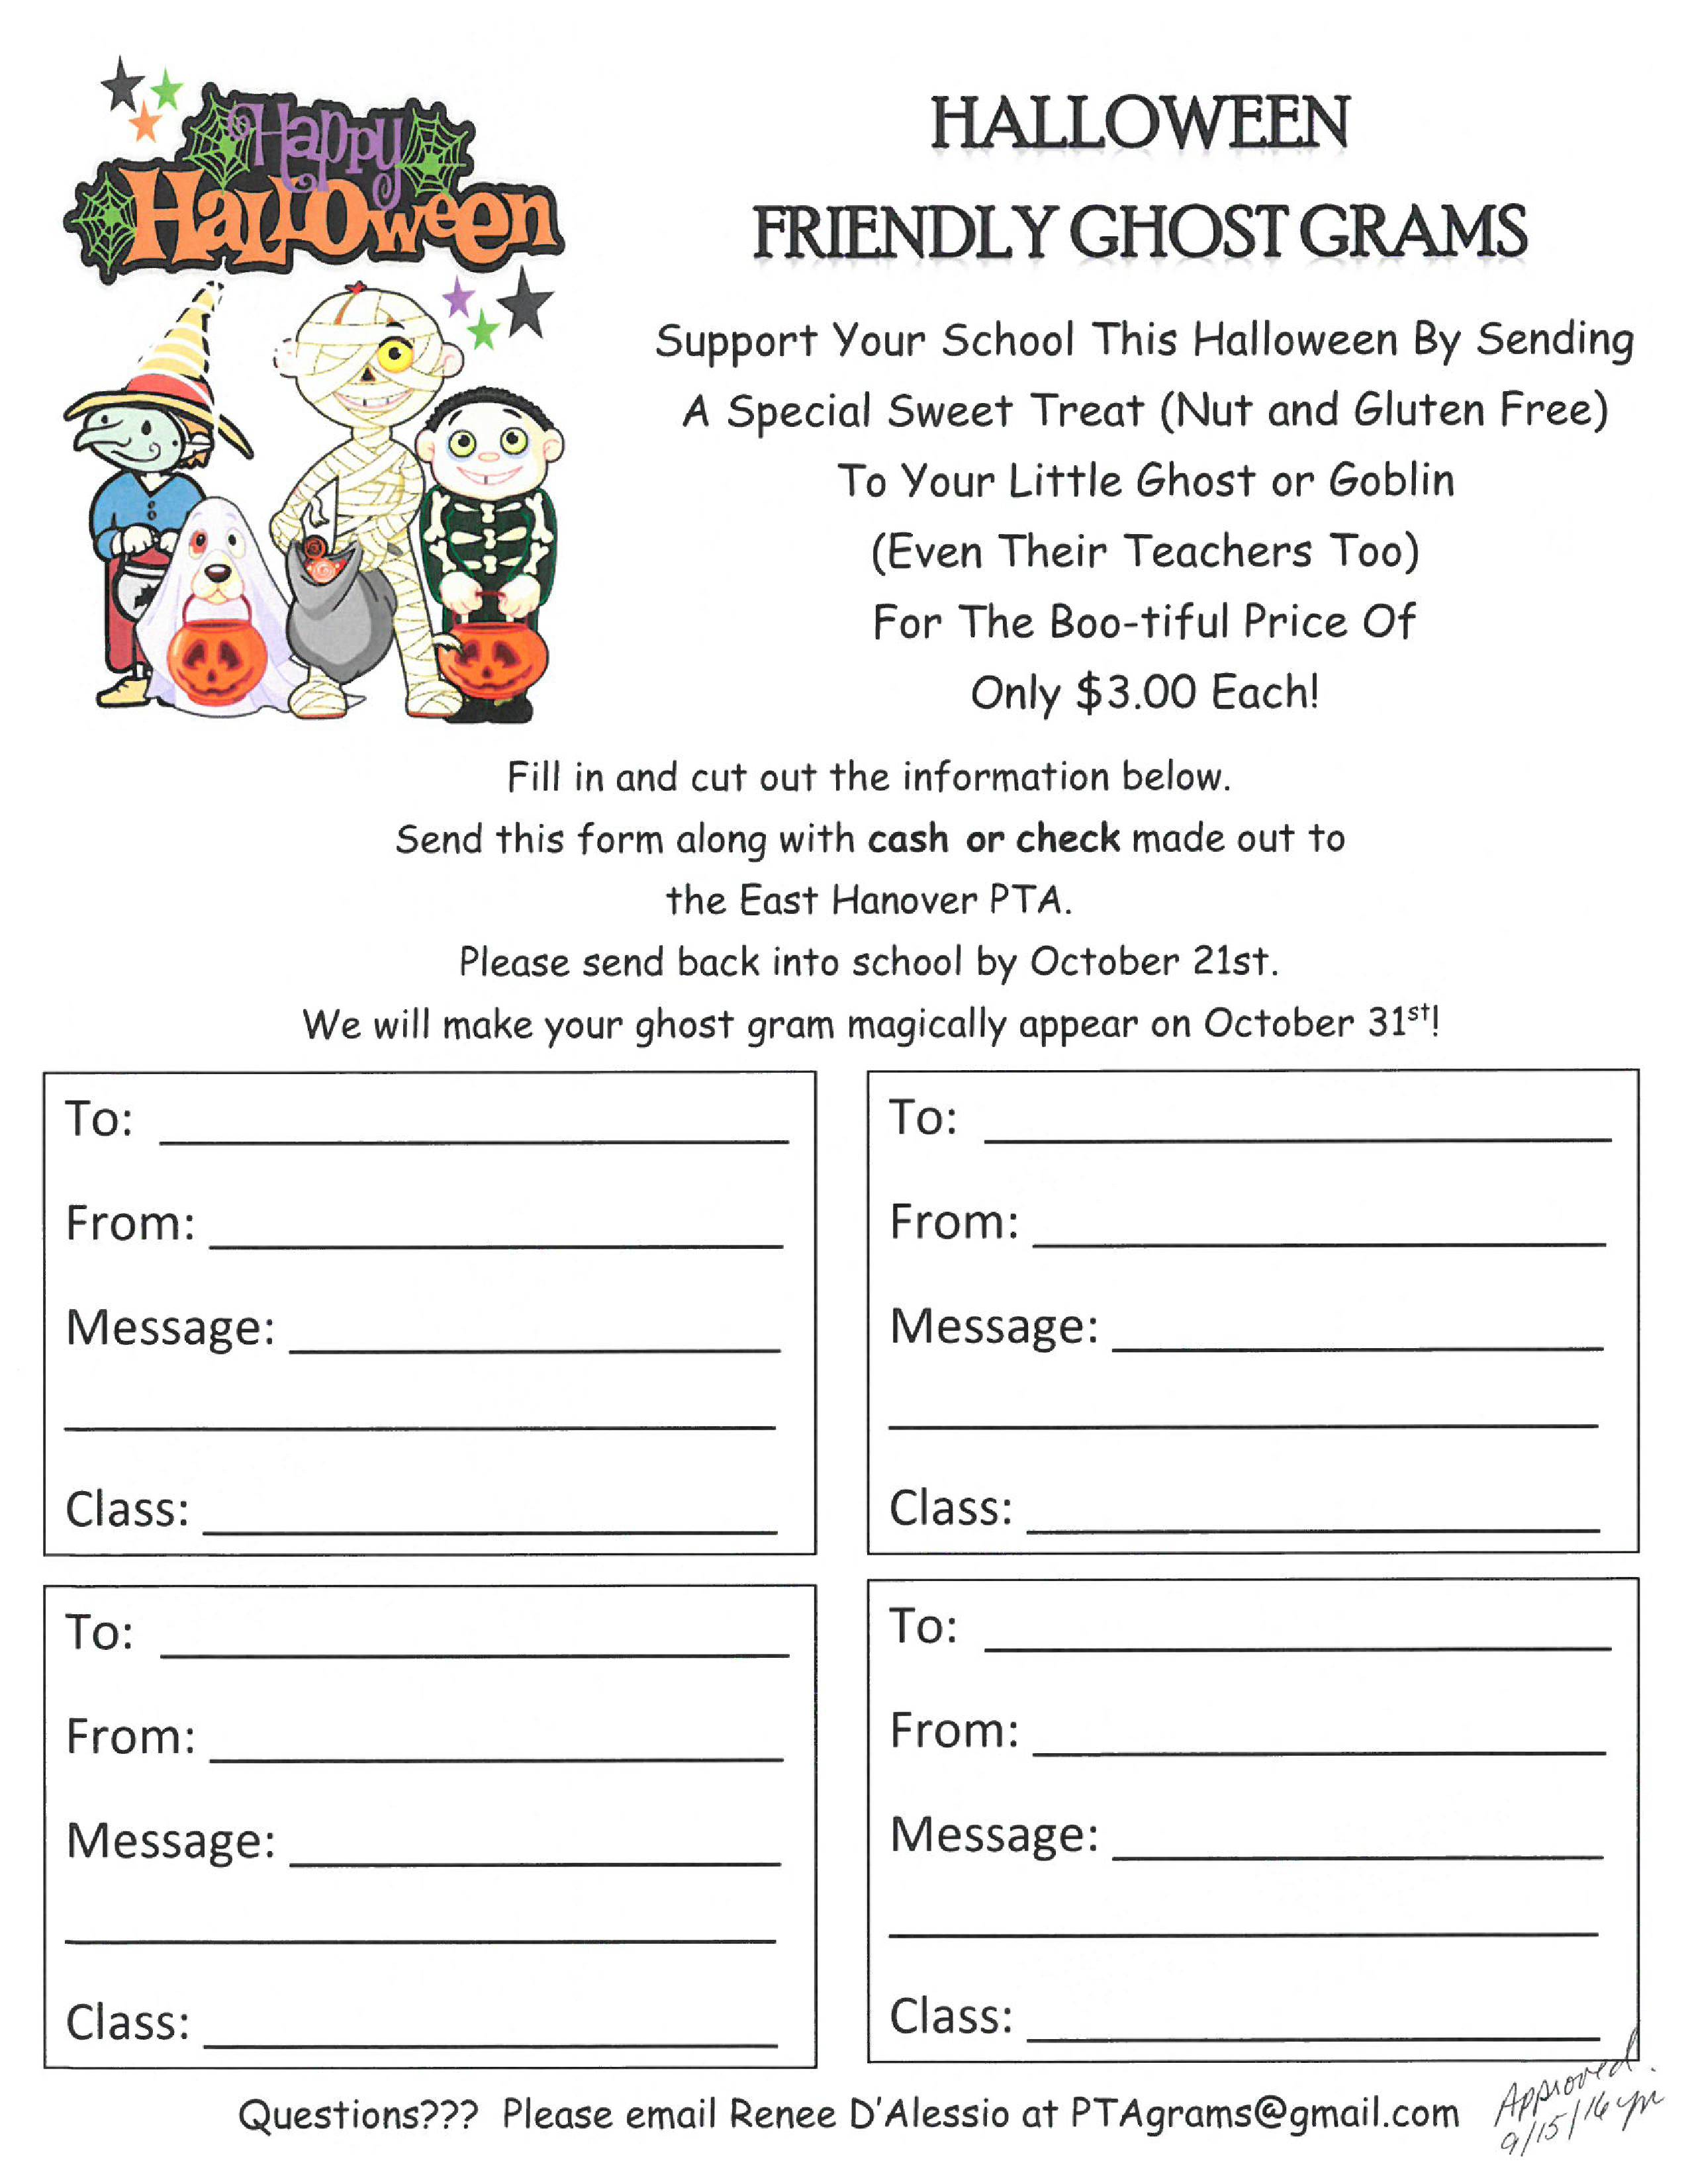 https://easthanoverpta.ourschoolpages.com/Image/2016-17%20images/PTA%20Halloween%20Candy%20Gram%20Flyer%20091516.jpg